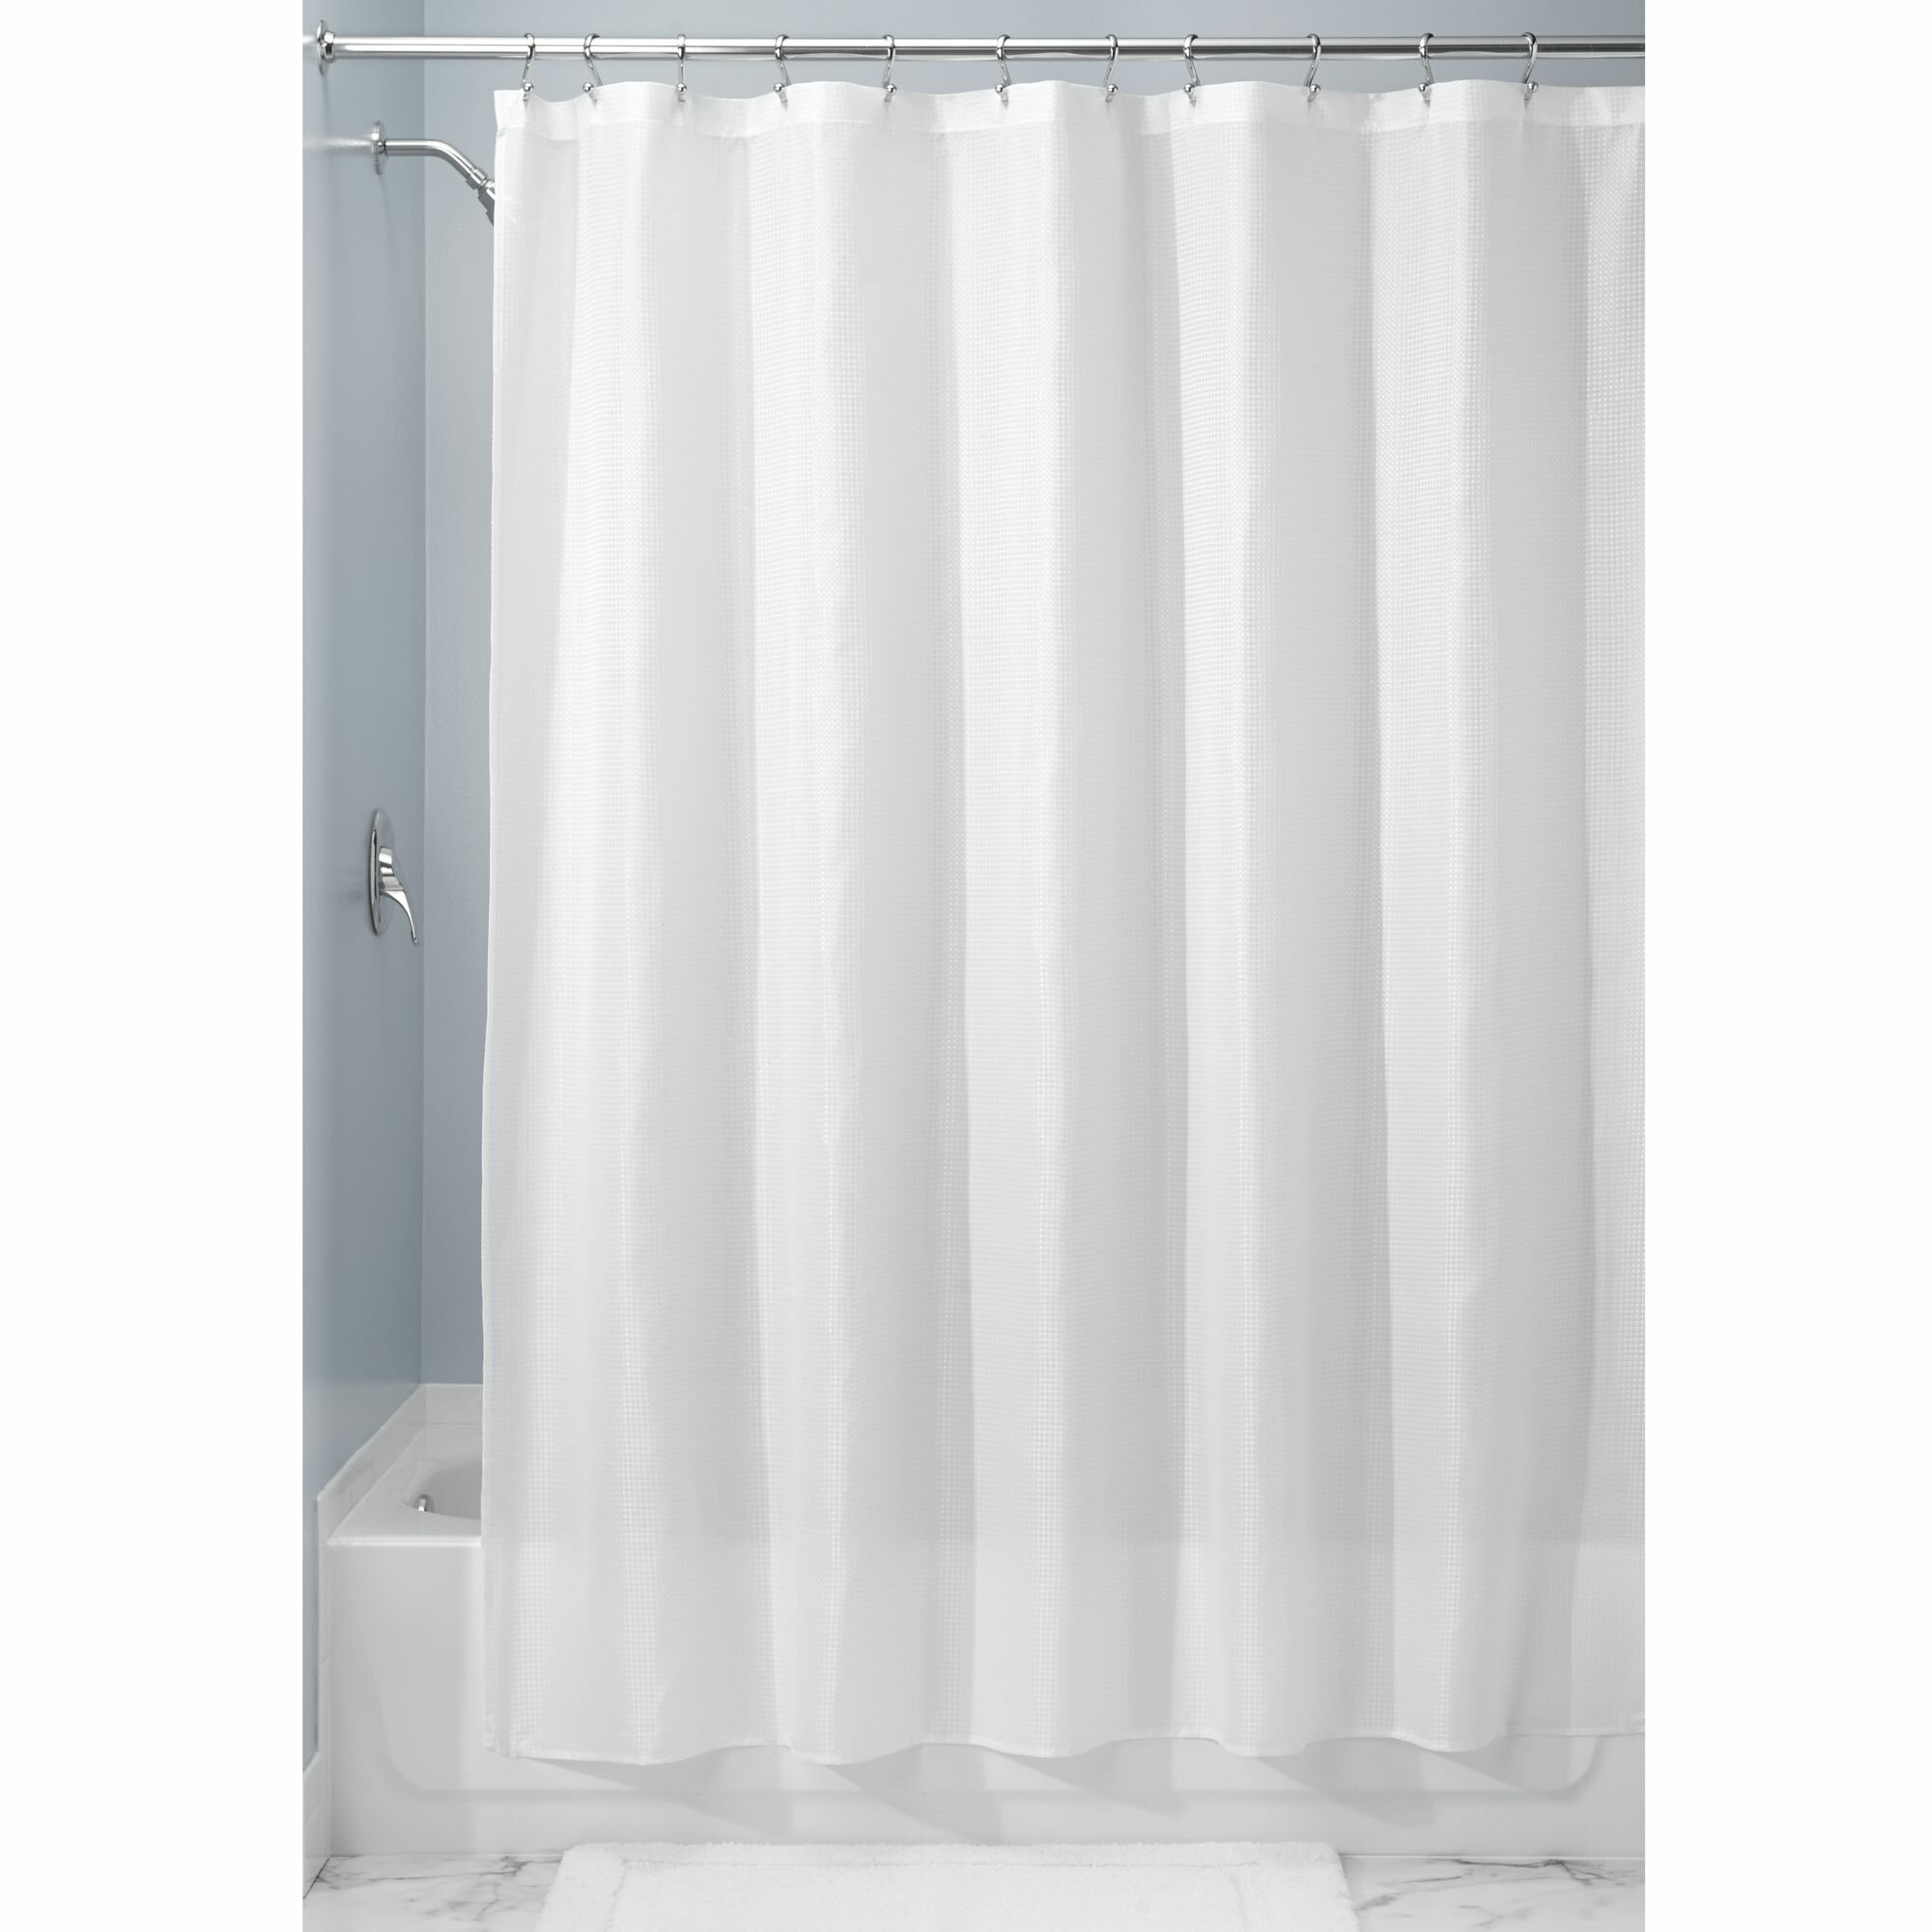 Polyester Fabric Shower Curtain Solid,Hotel Quality Bathroom Shower Curtains 